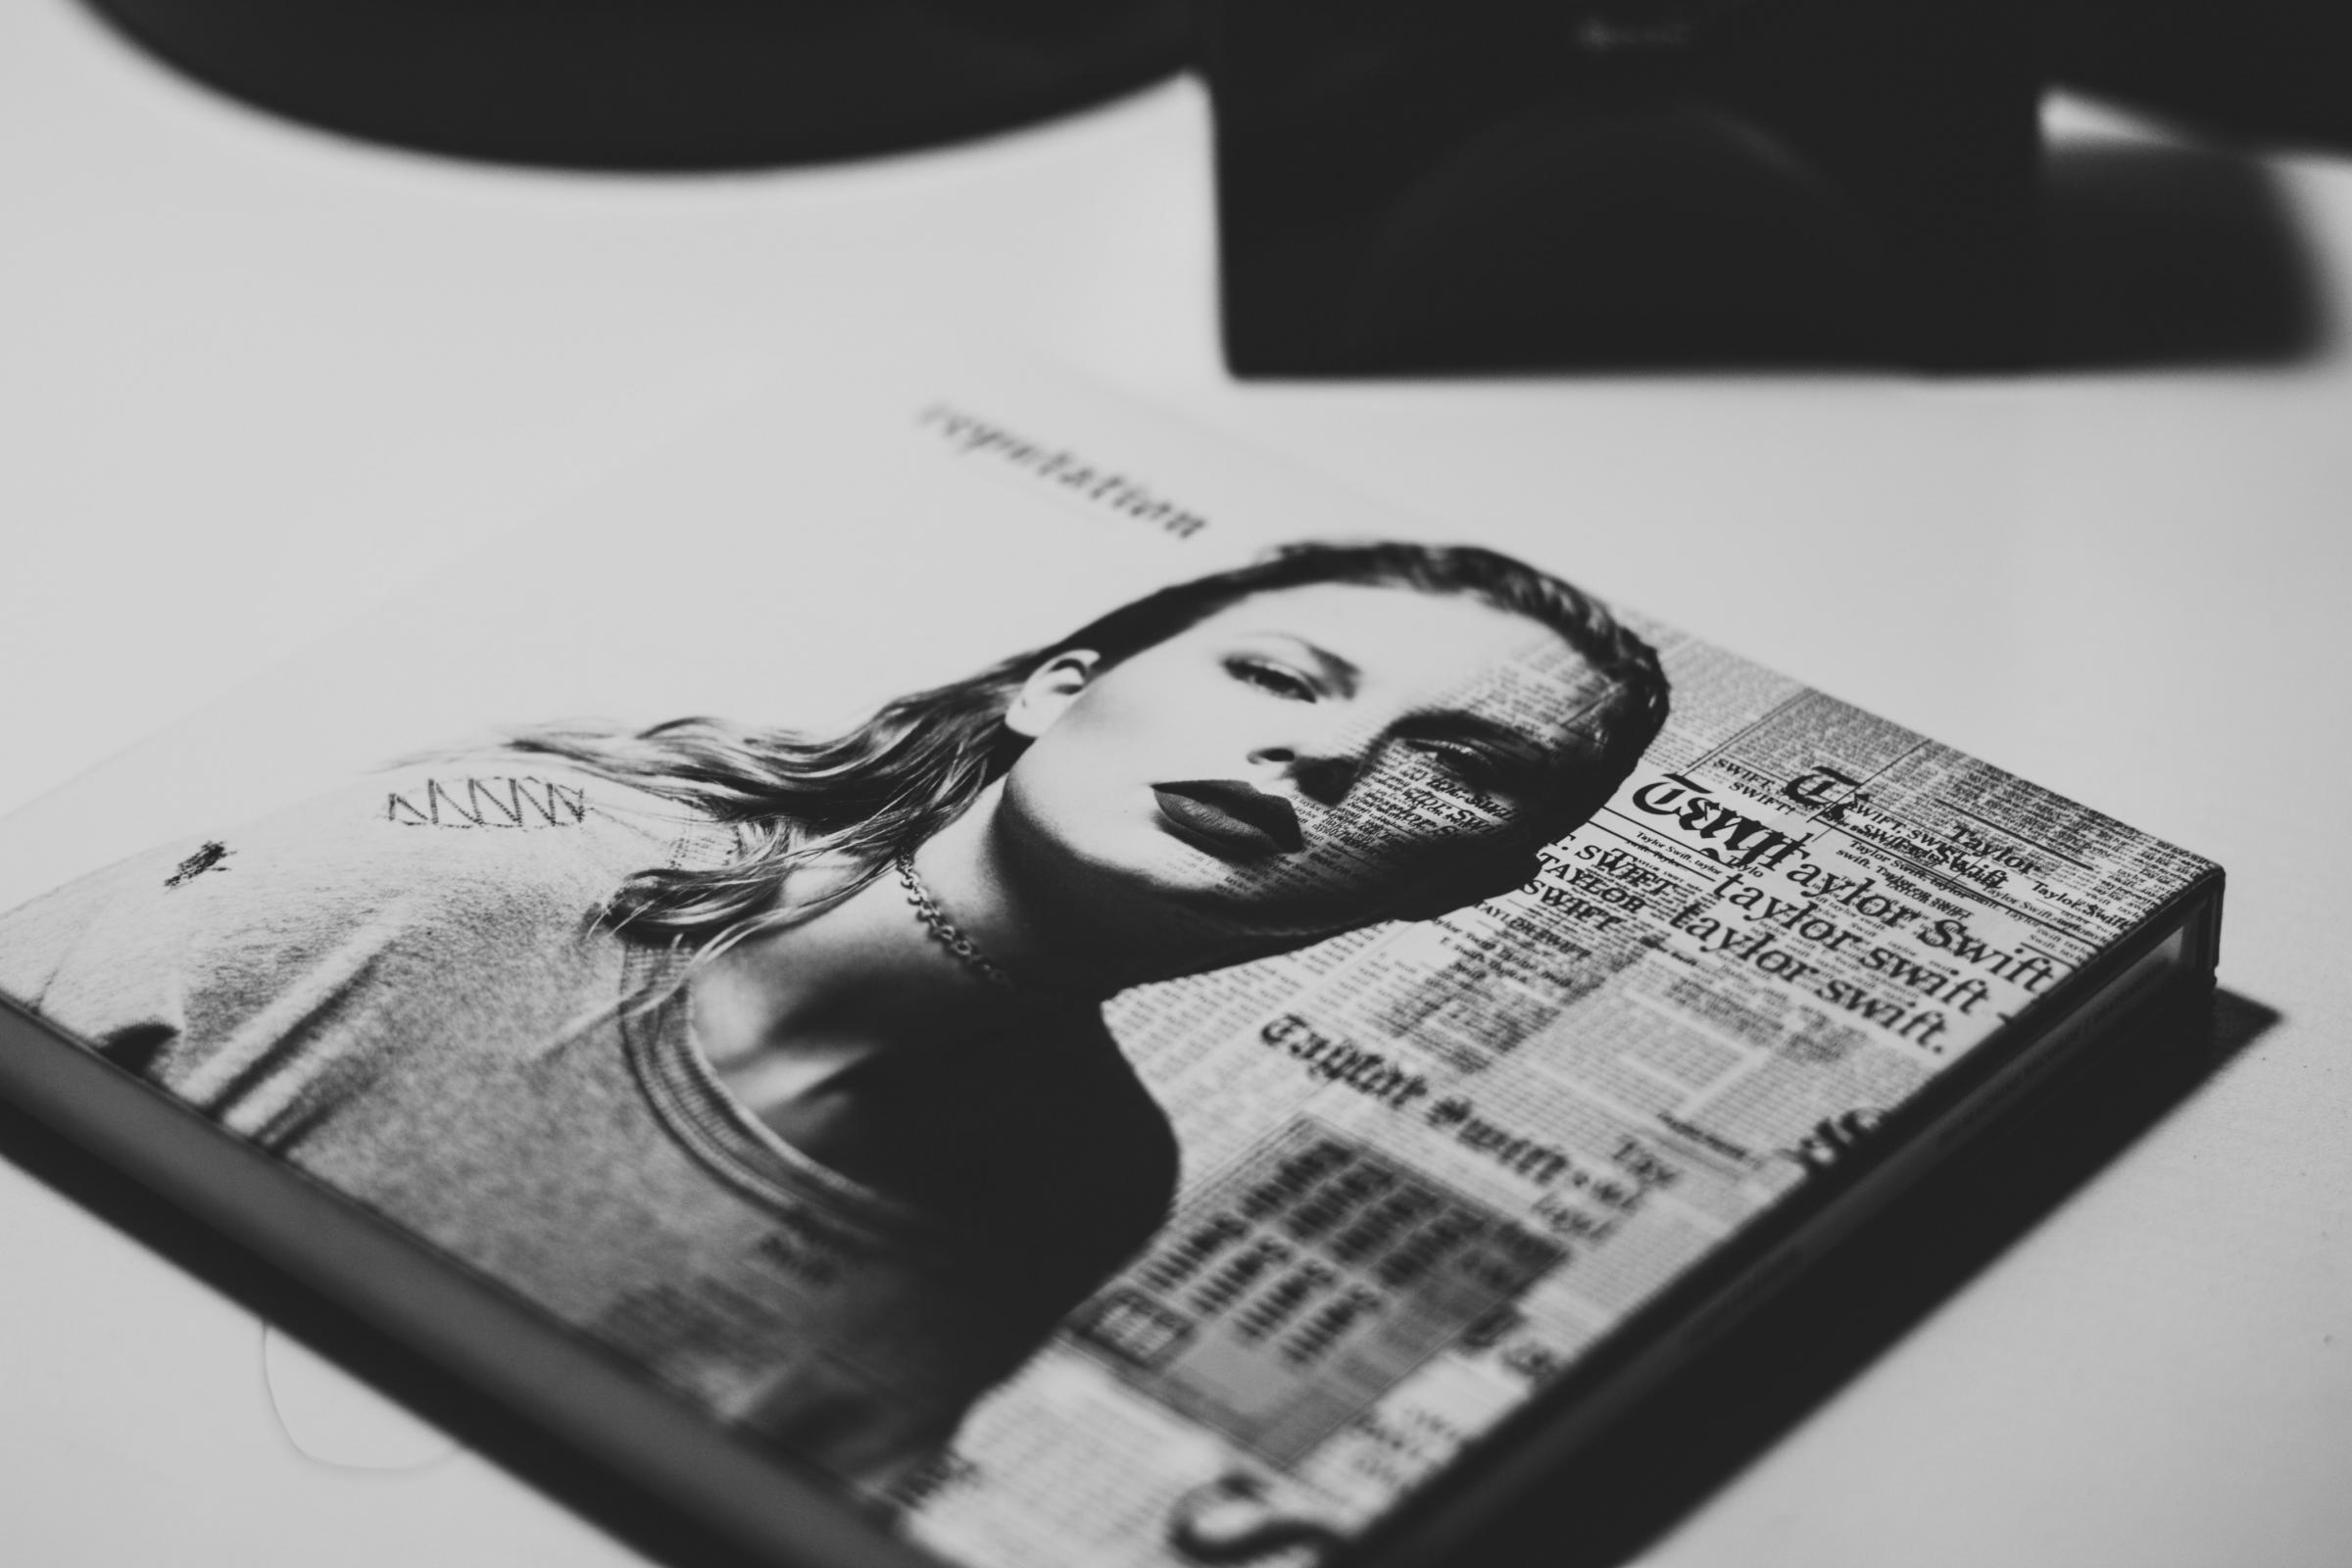 Taylor Swift book cover photo by Rosa Rafael on Unsplash.